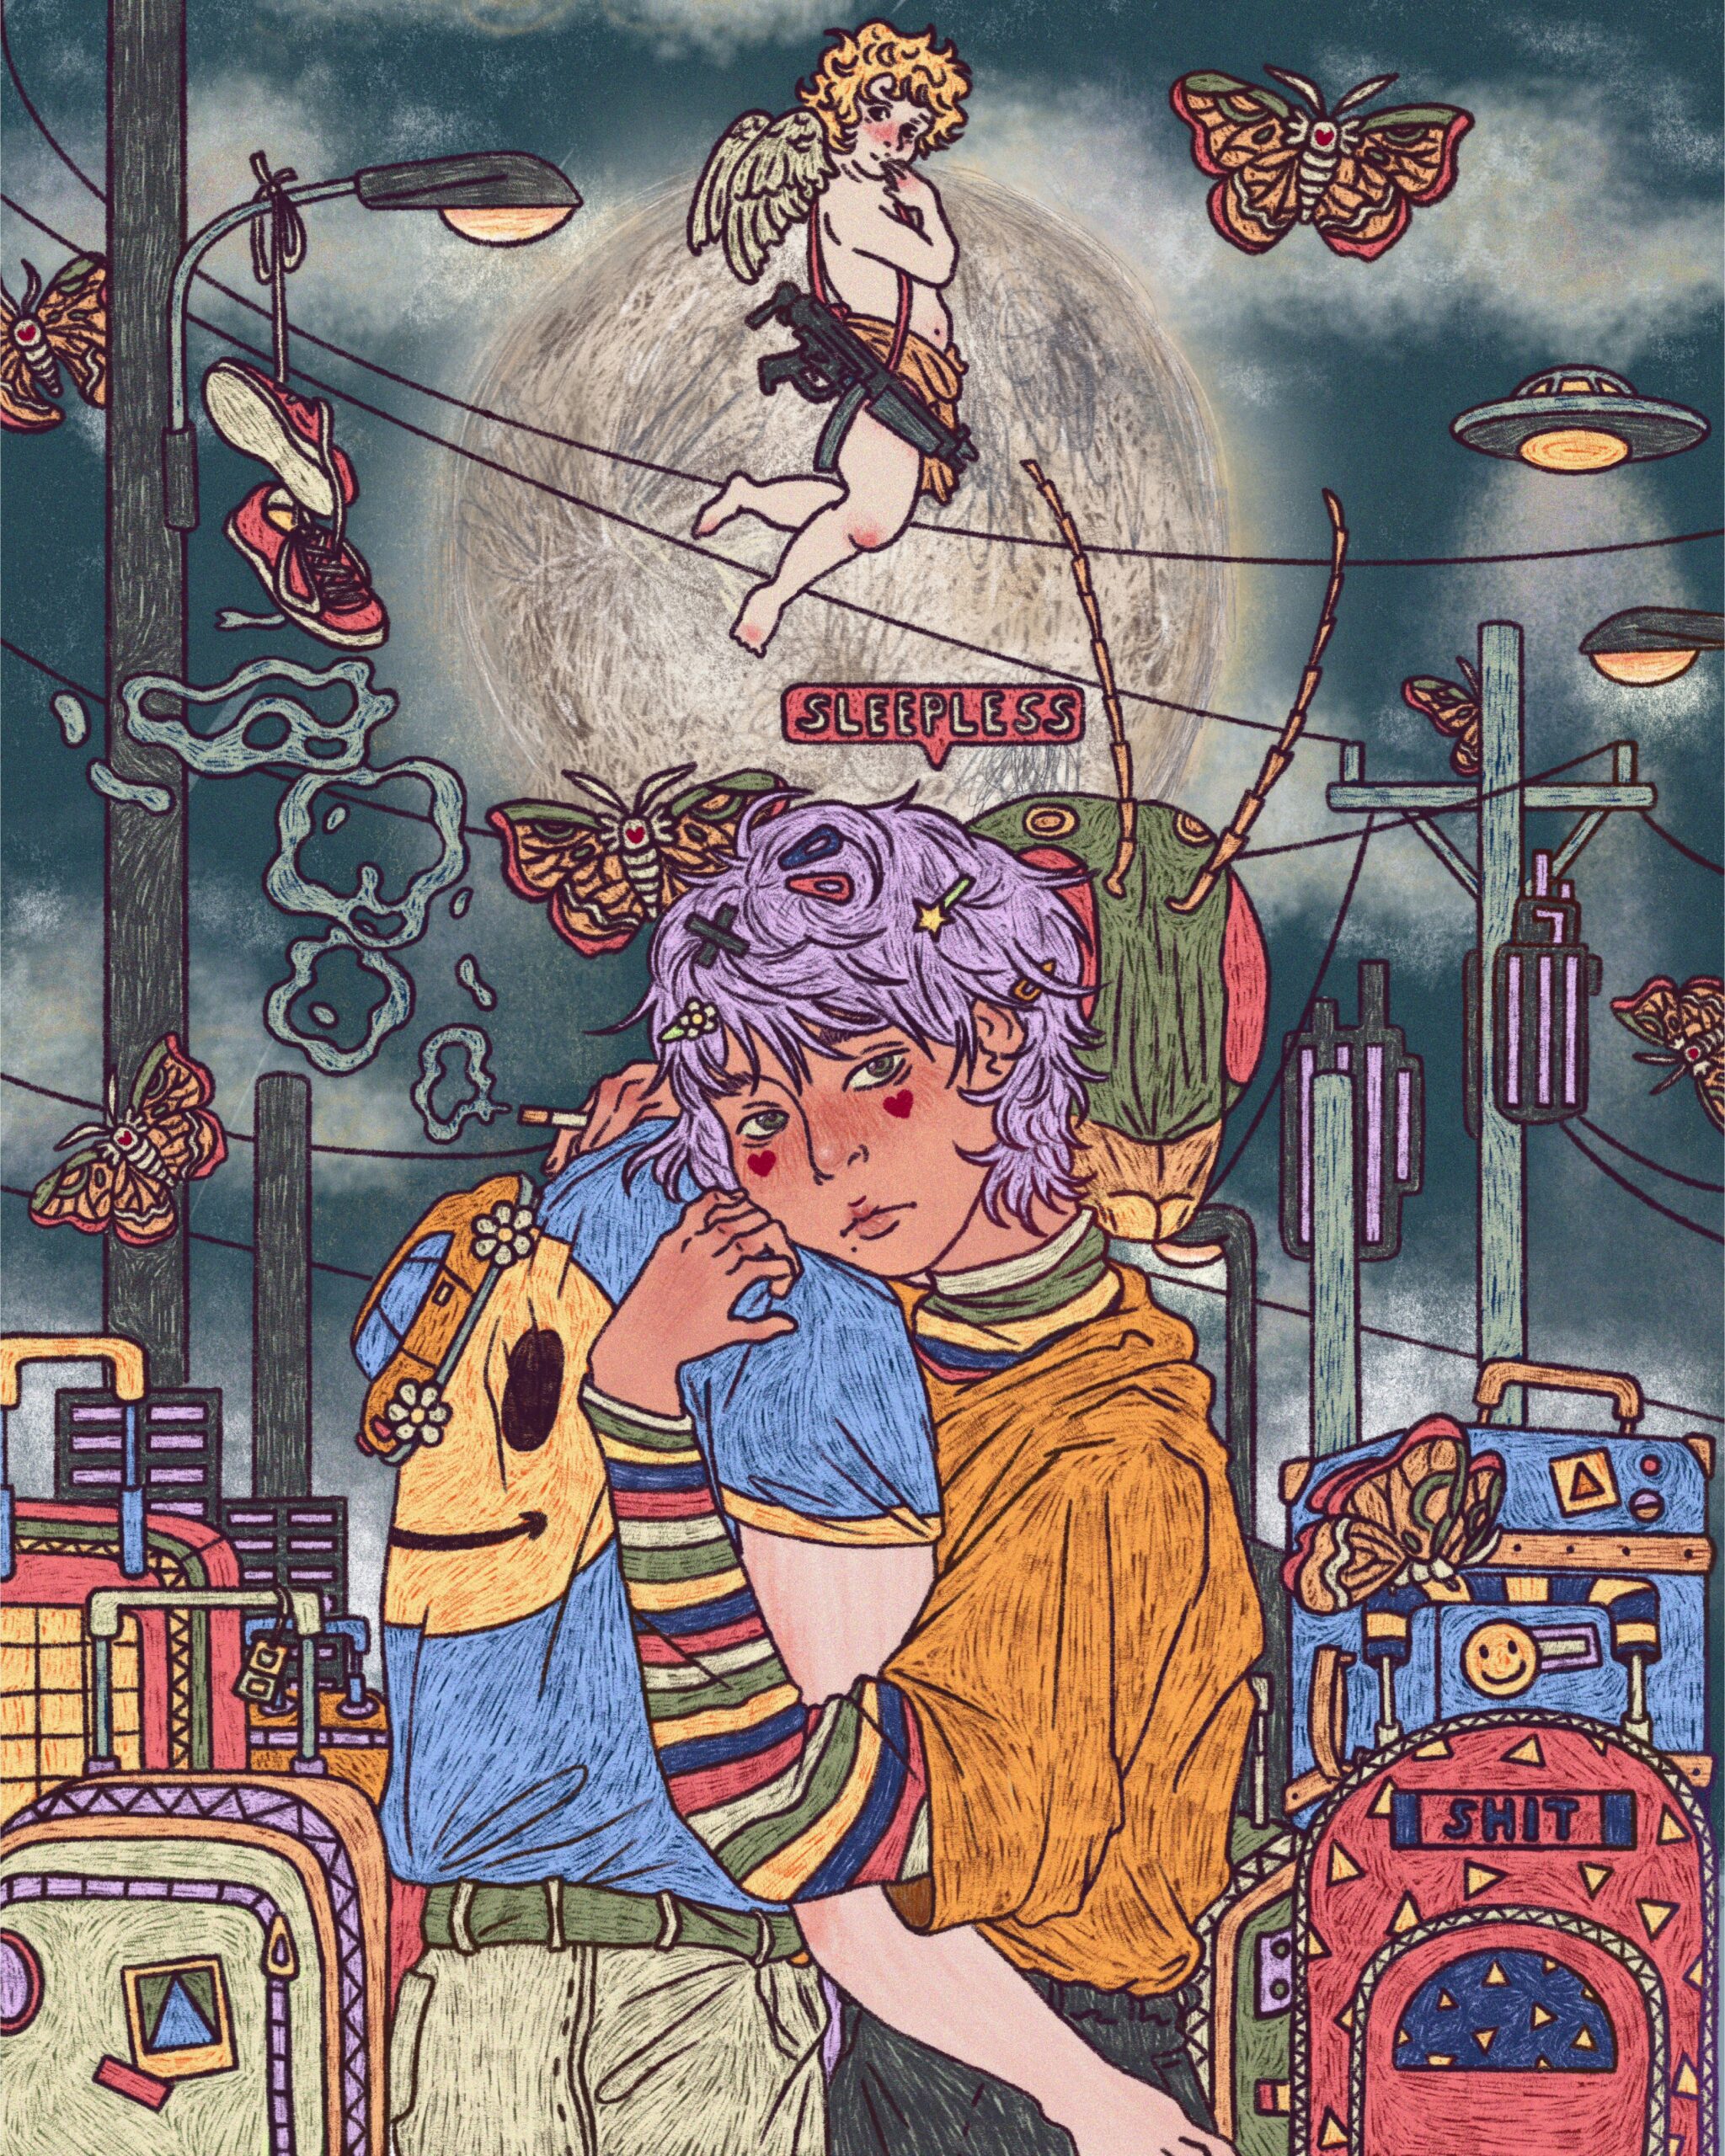 Two figures embrace. One has an insect head, the other sports purple hair festooned with multiple colourful barrettes. Colourful luggage is piled around the scene. Butterflies flit about the grey night sky, in which smoke circles waft from the lit cigarette held by one of the lovers. A cupid floats before a giant full moon, next to power lines and streetlights. A small orange car navigates down the back of one figure. The word ‘sleepless’ in a red speech bubble is suspended overhead.